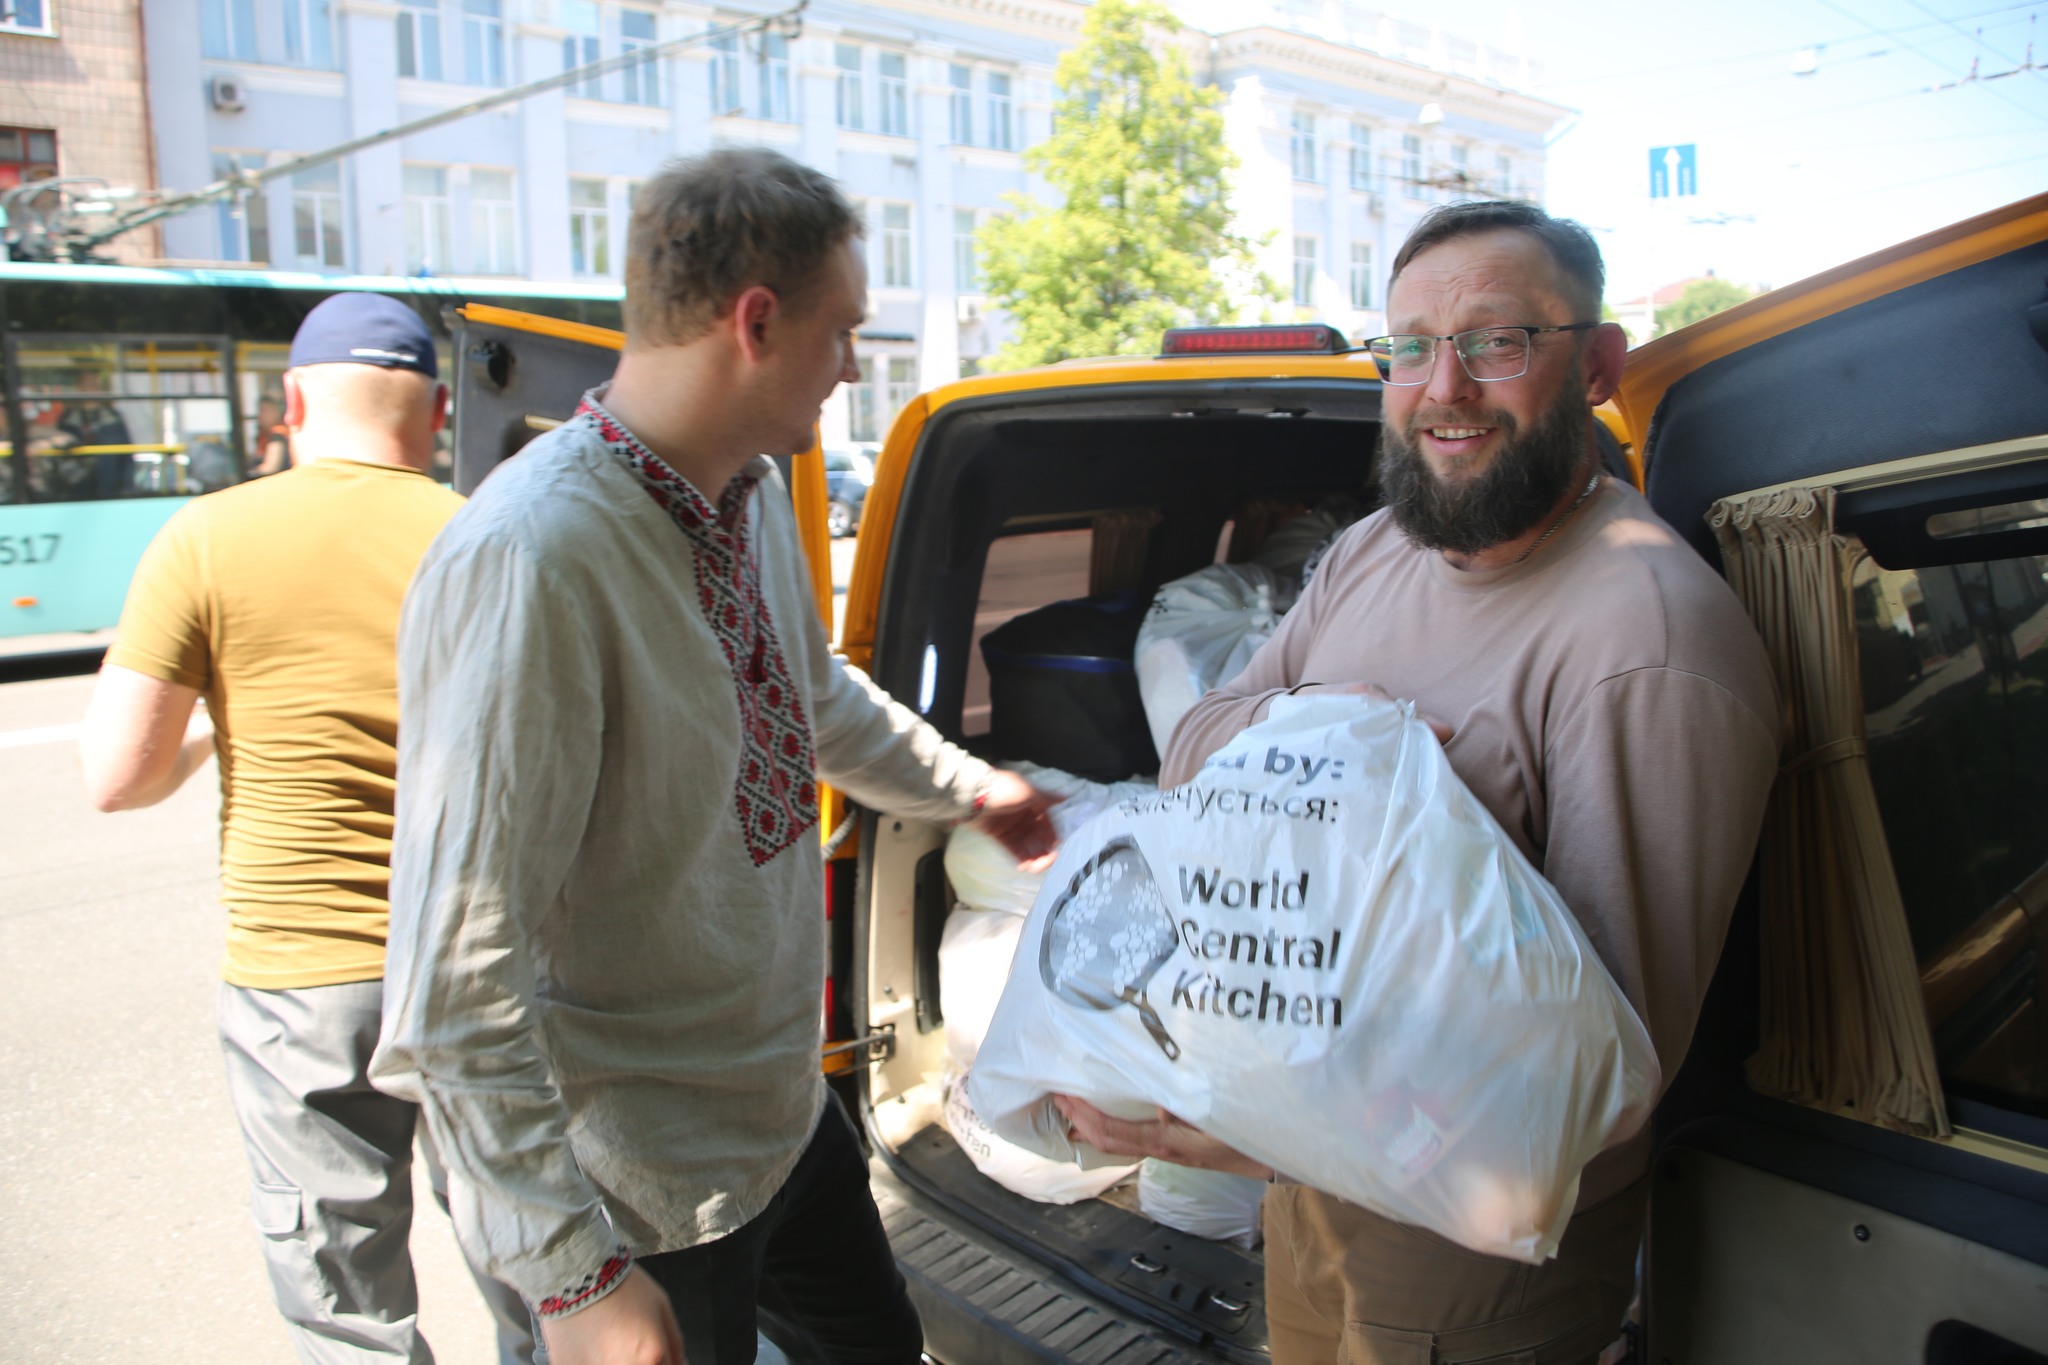 Farther Roman has just taken product bags from La Pizza Espresso, which he will bring to people from remote villages in Chernihiv Oblast who suffered severely from the Russian occupation. Photo by Orysia Hrudka ~